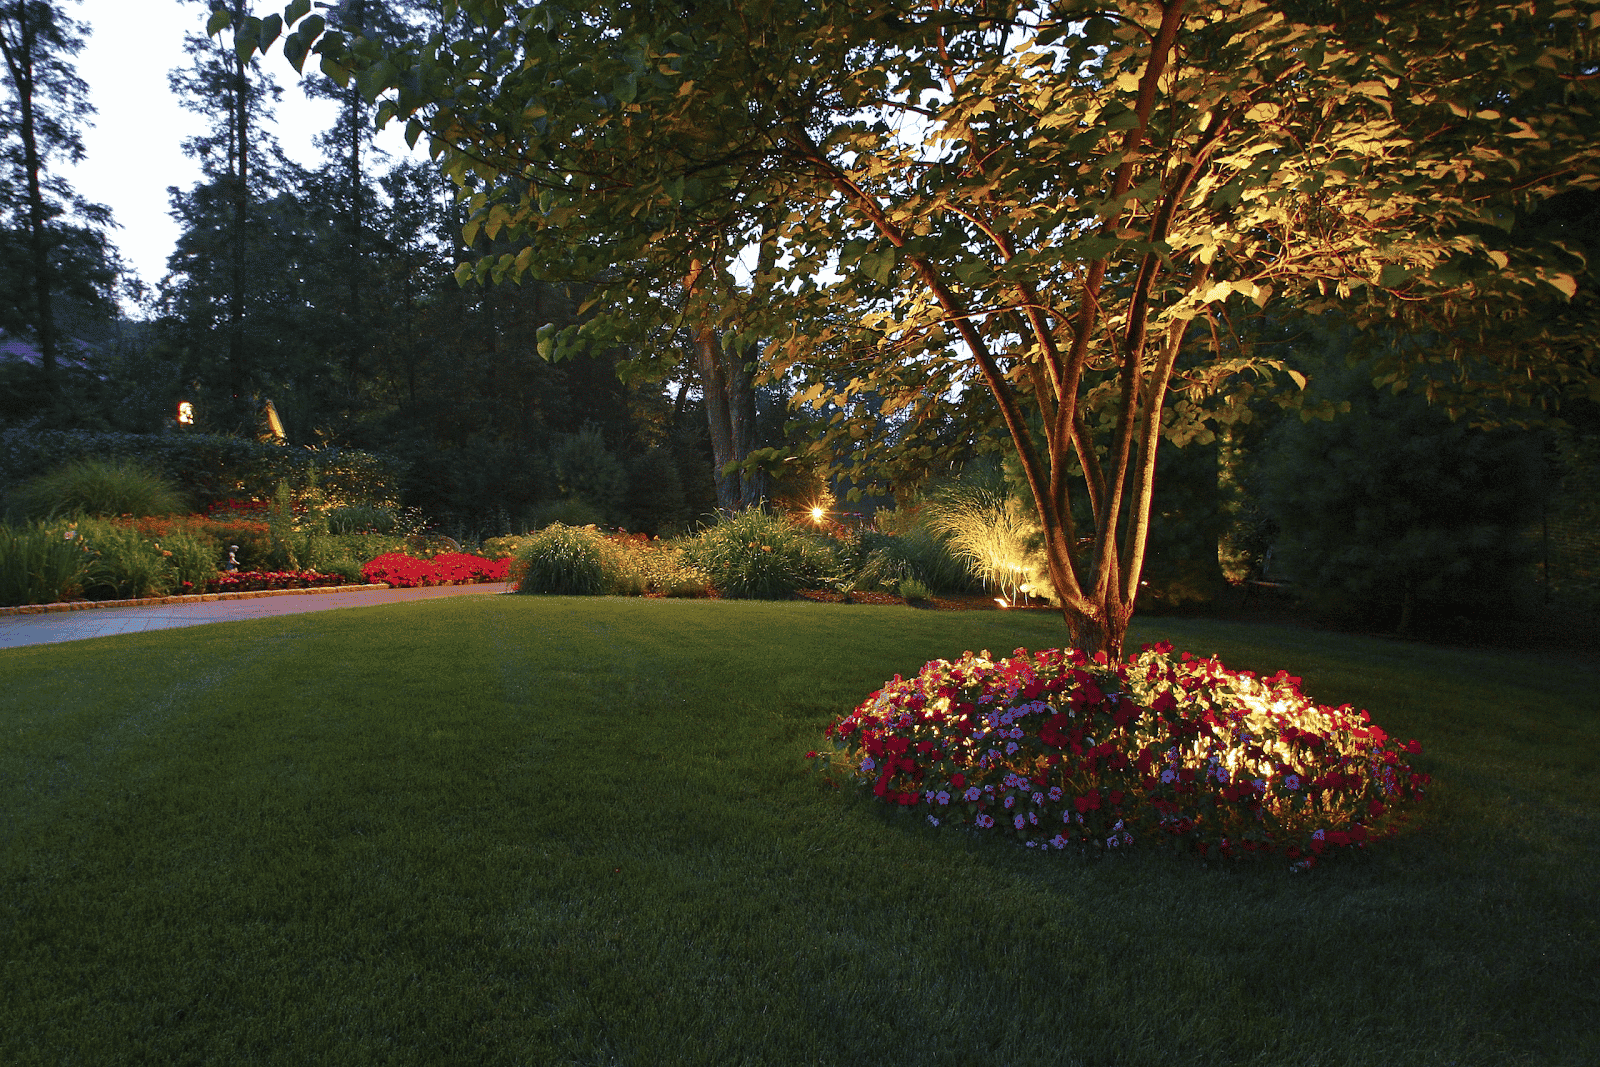 Evening view of illuminated tree surrounded by flowers